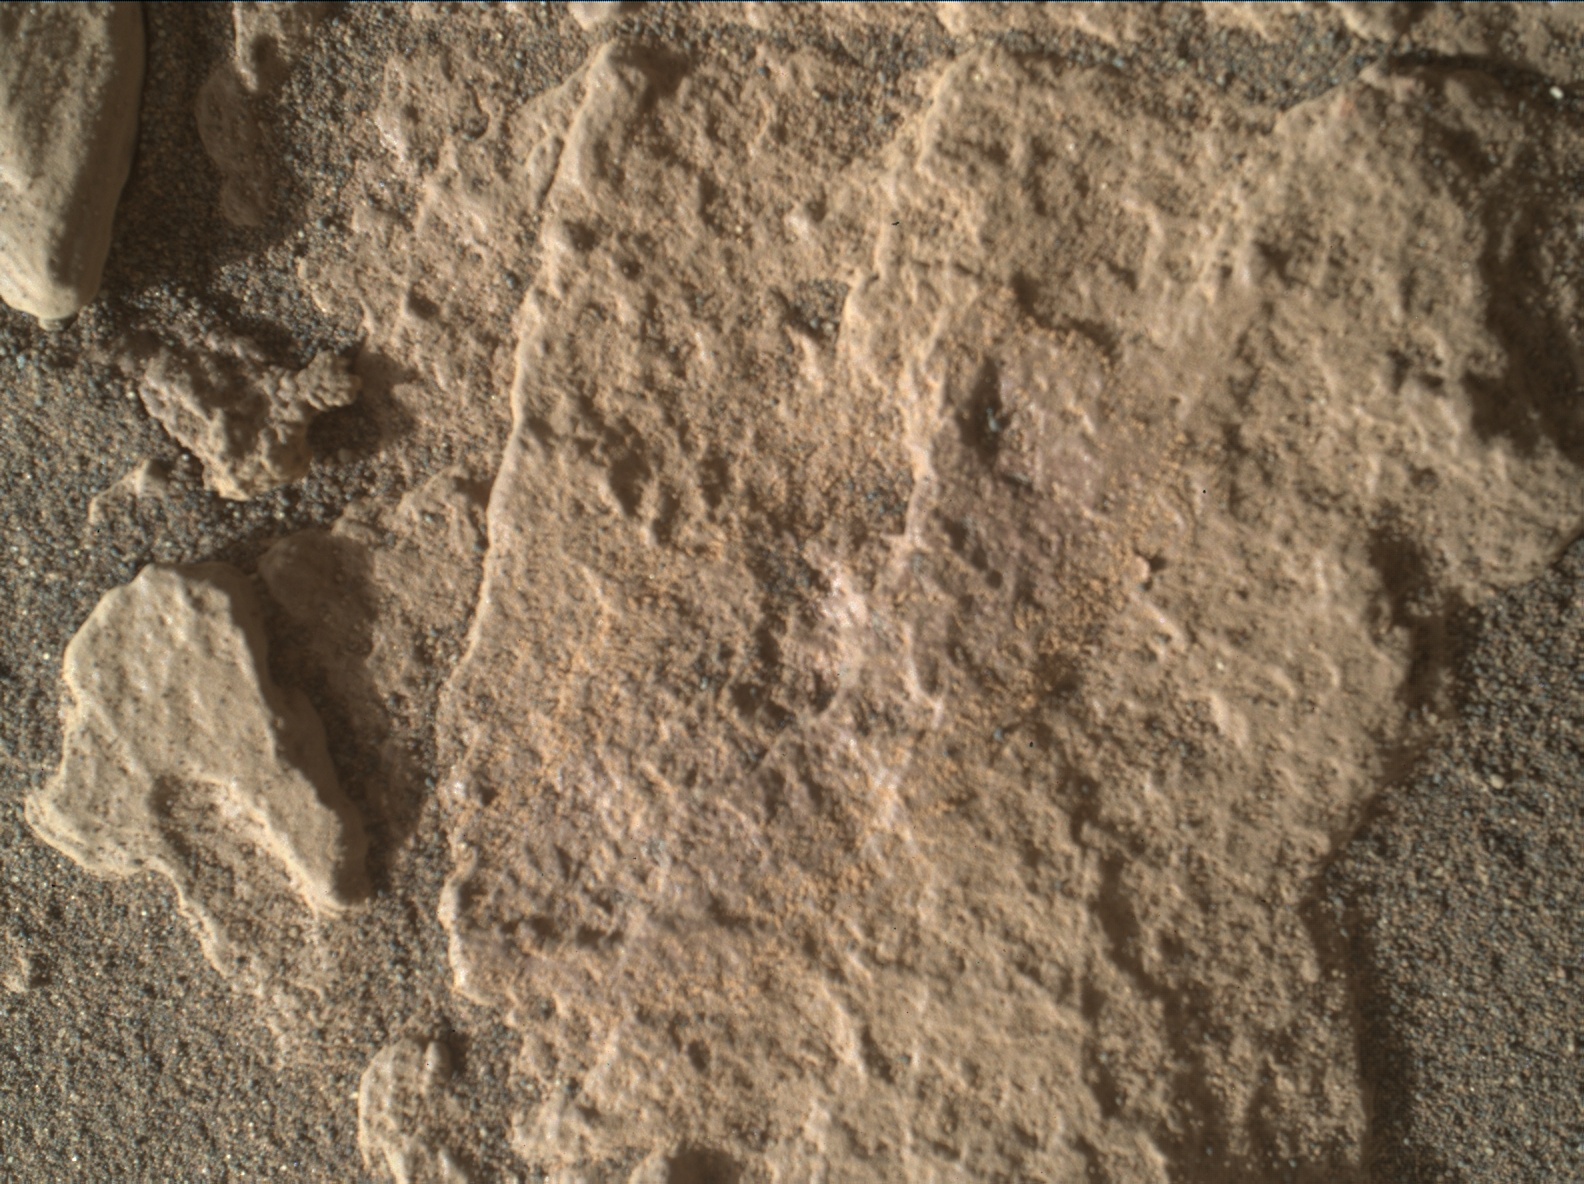 Nasa's Mars rover Curiosity acquired this image using its Mars Hand Lens Imager (MAHLI) on Sol 1947